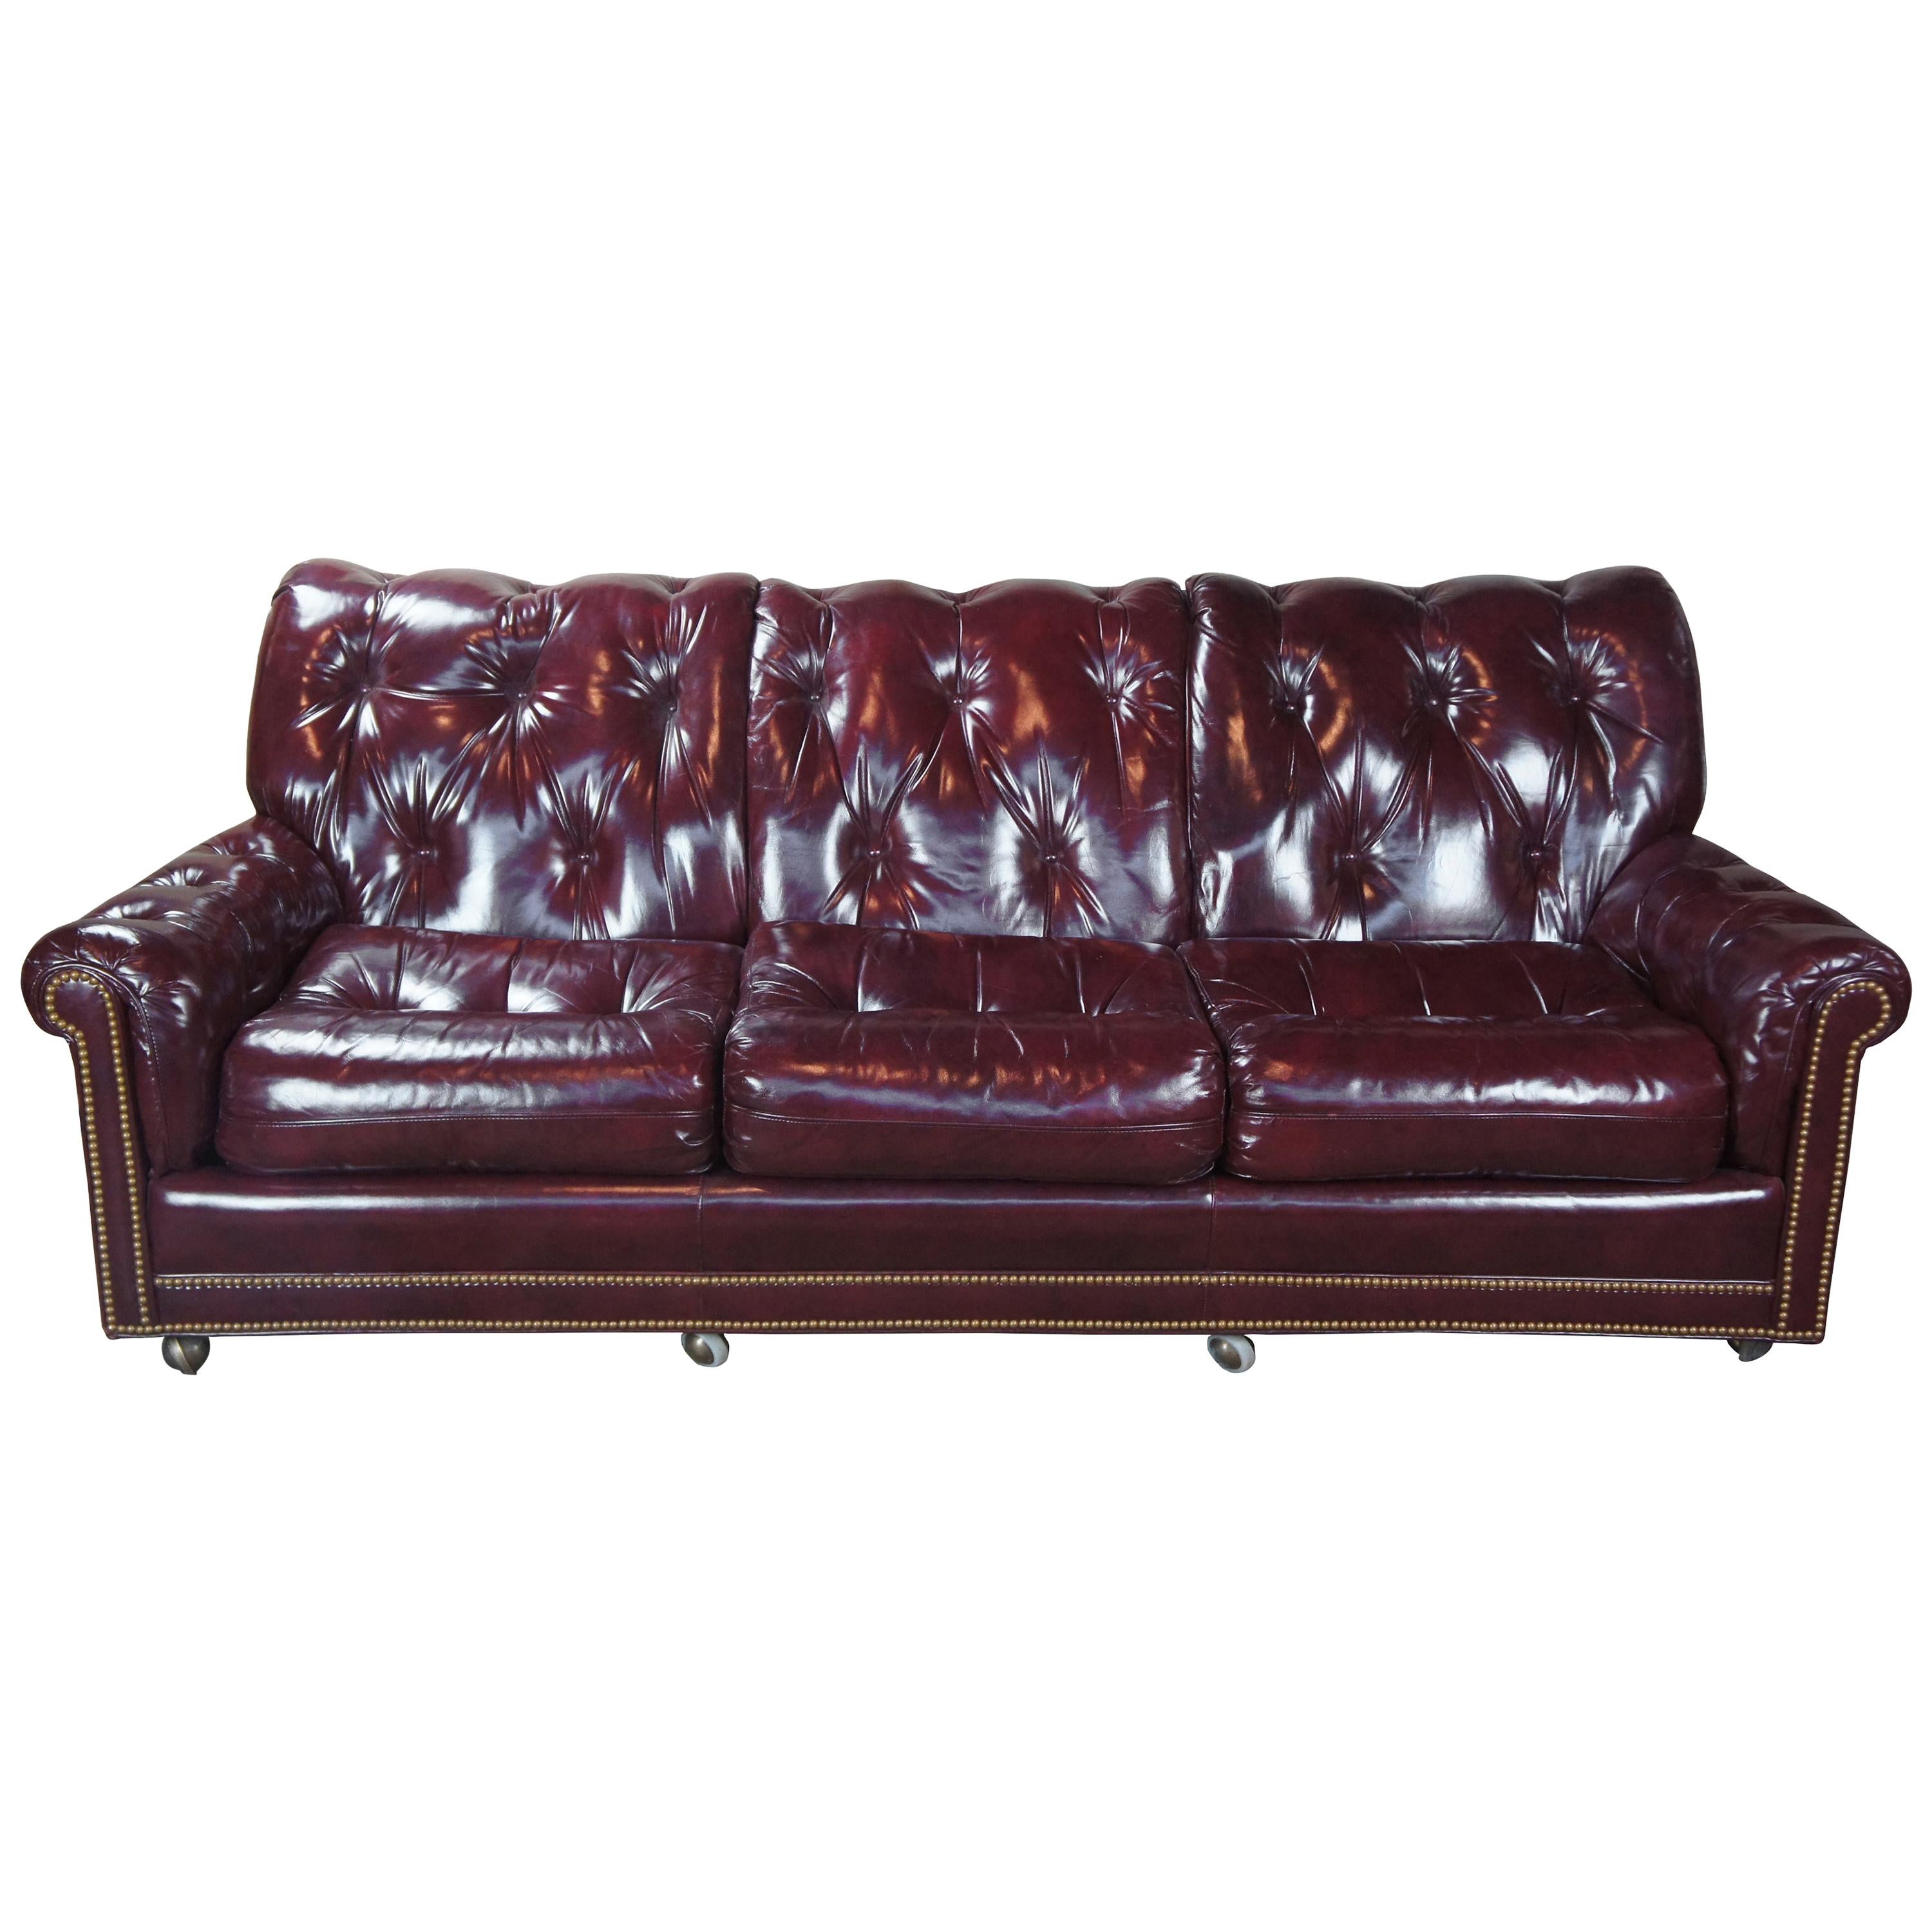 Vintage Hancock & Moore Red Burgundy Leather Tufted Chesterfield Sofa Couch